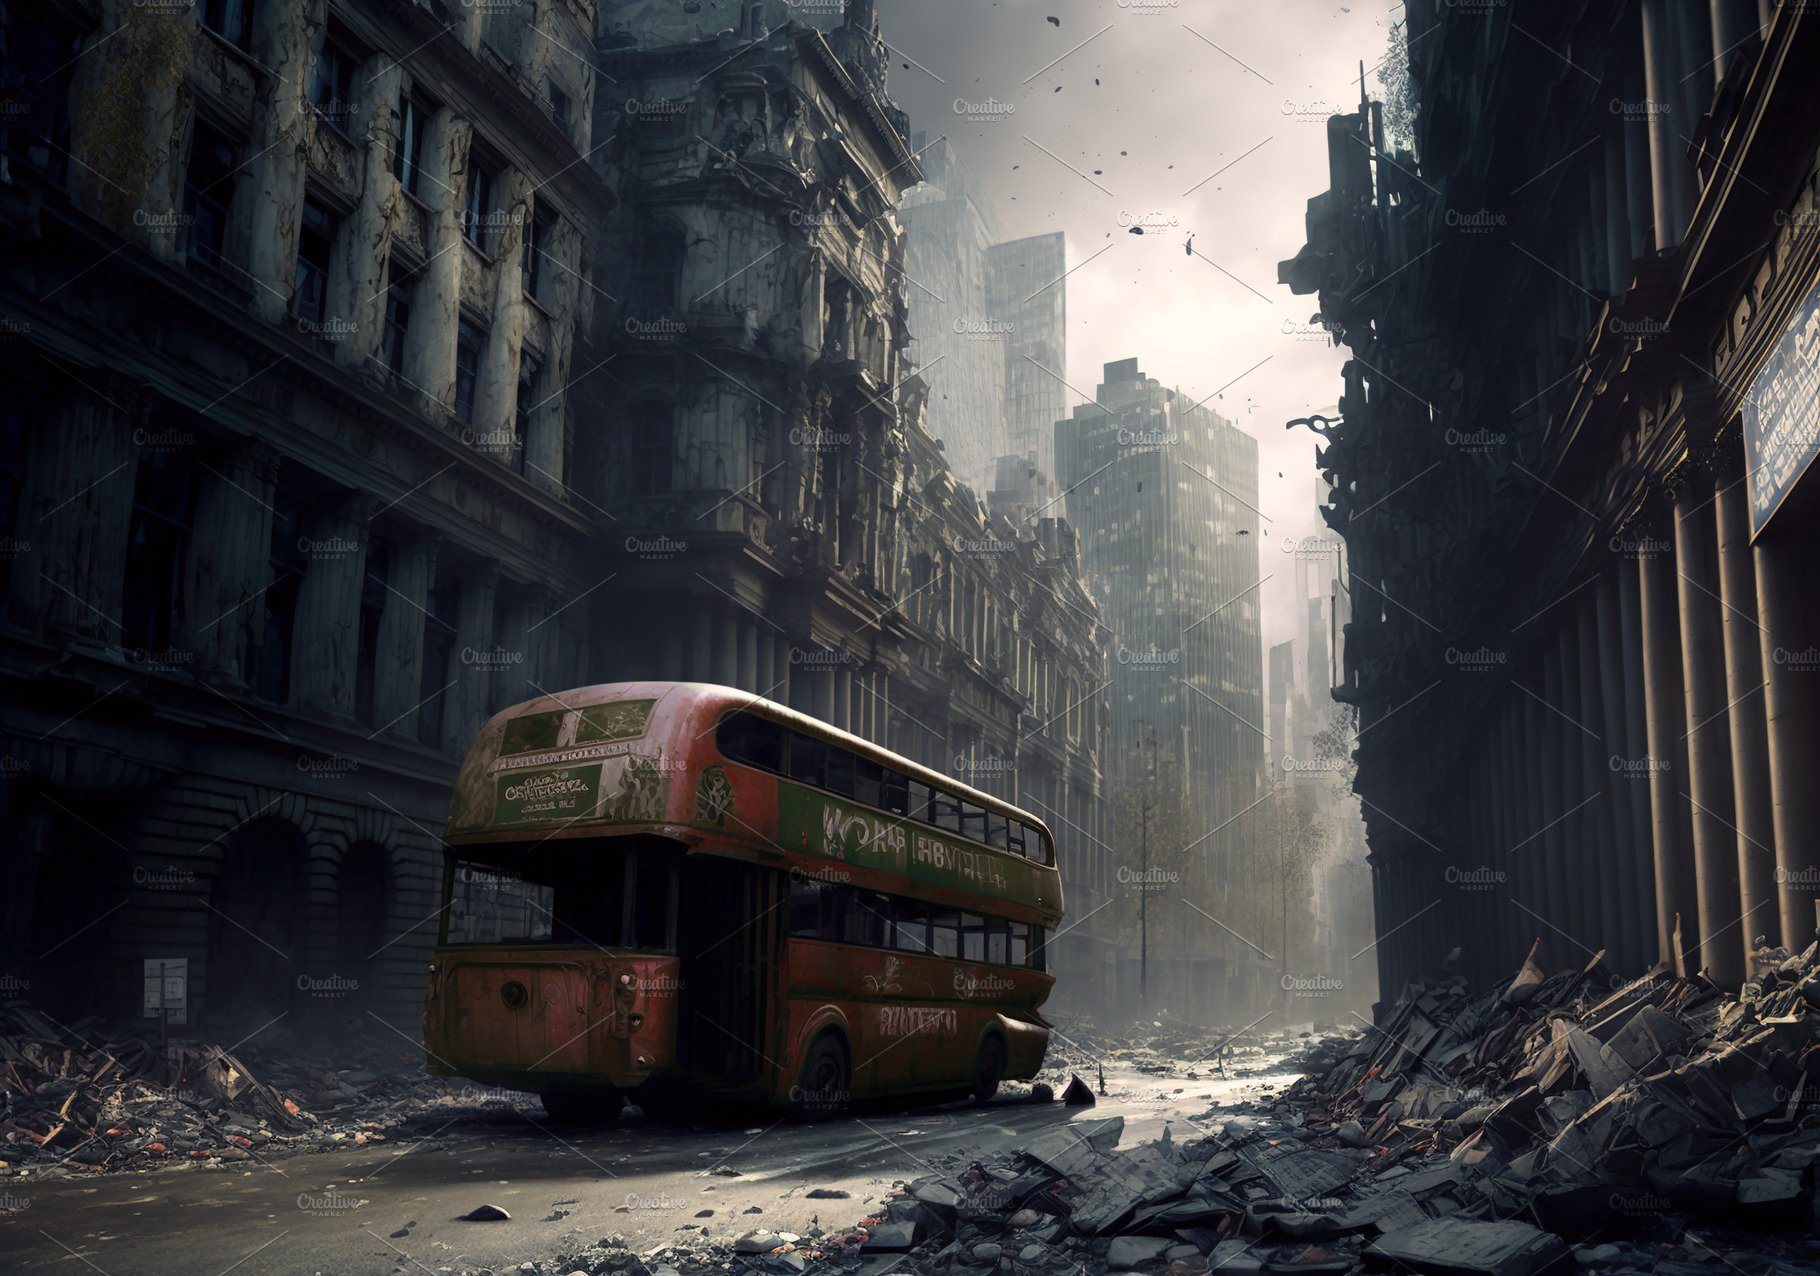 Apocalyptic view of destroyed London cover image.